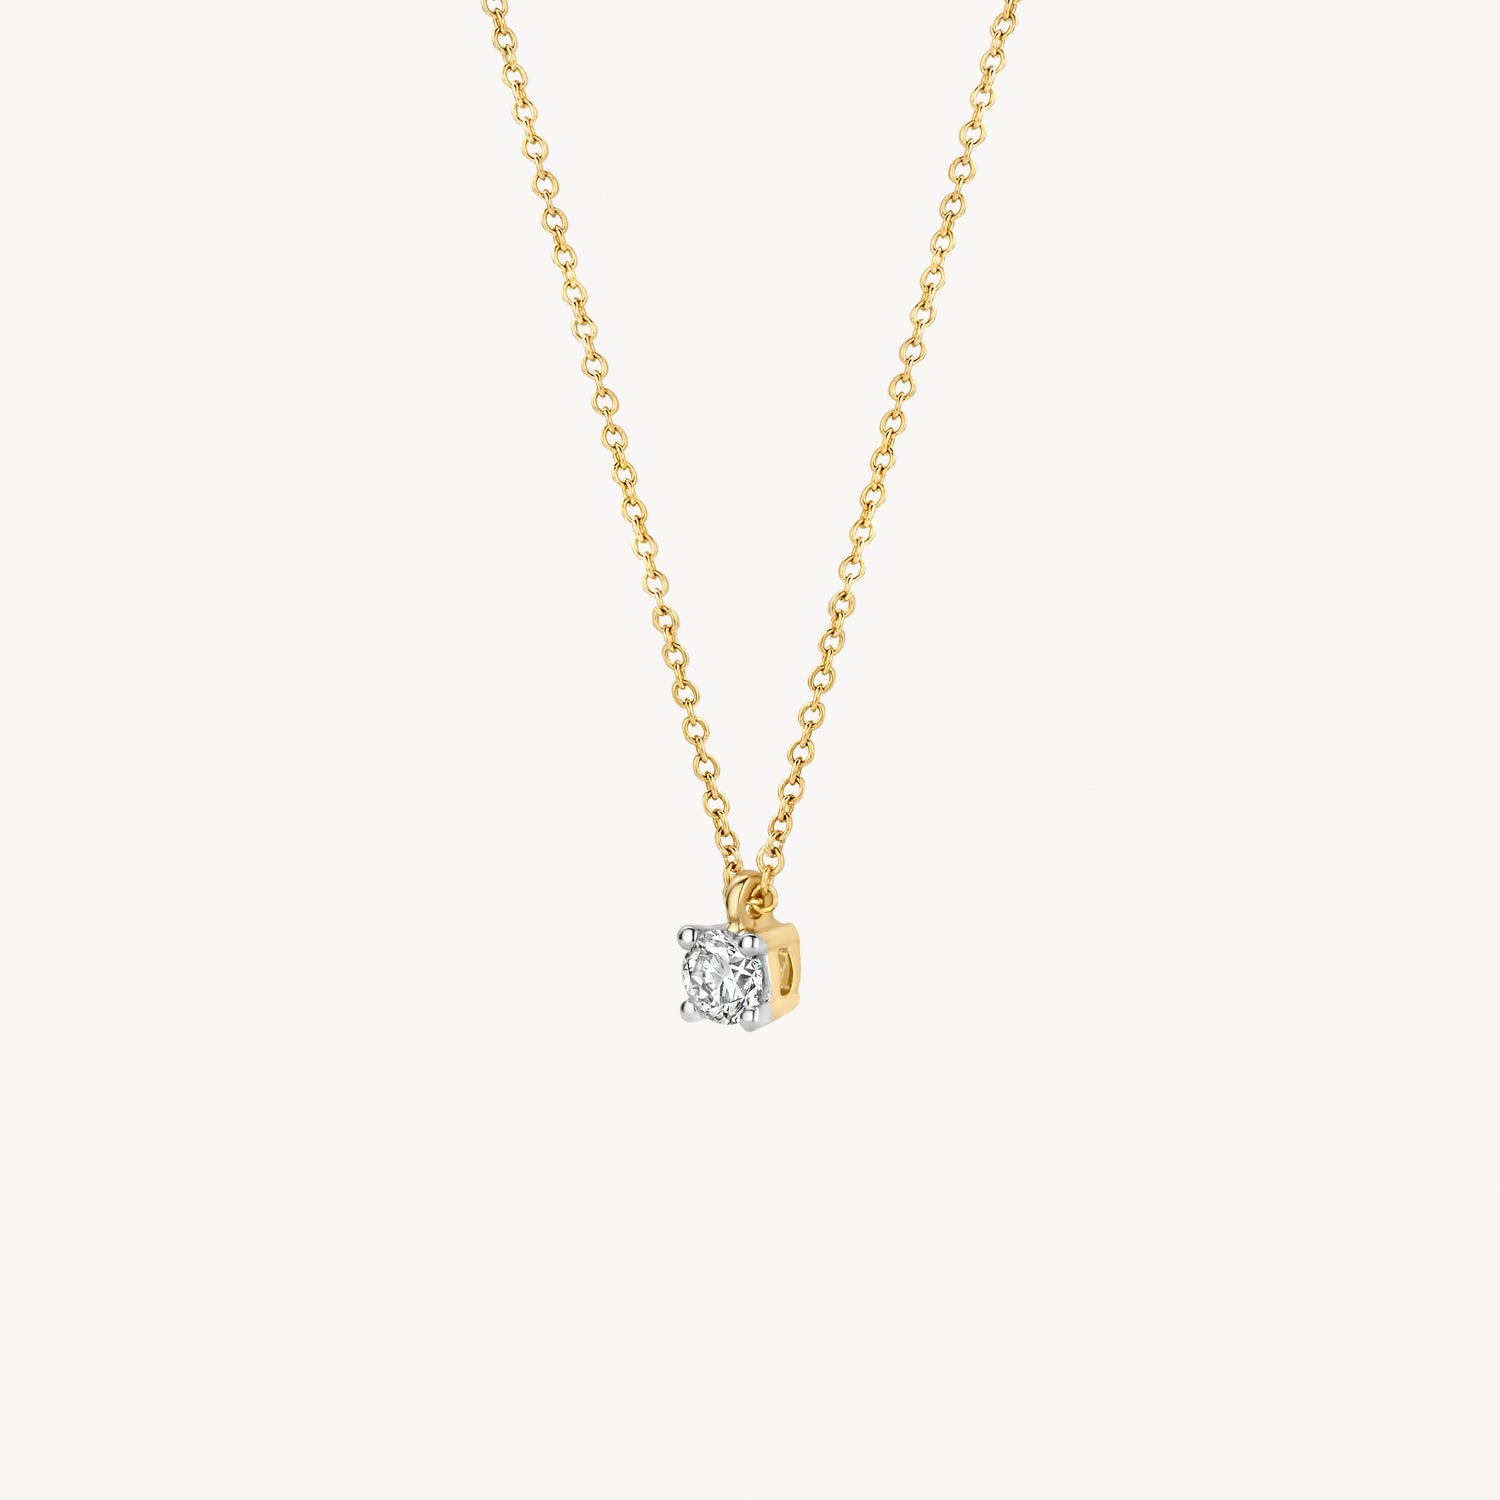 Necklace 3611YDI - 14k Yellow and white gold with diamond